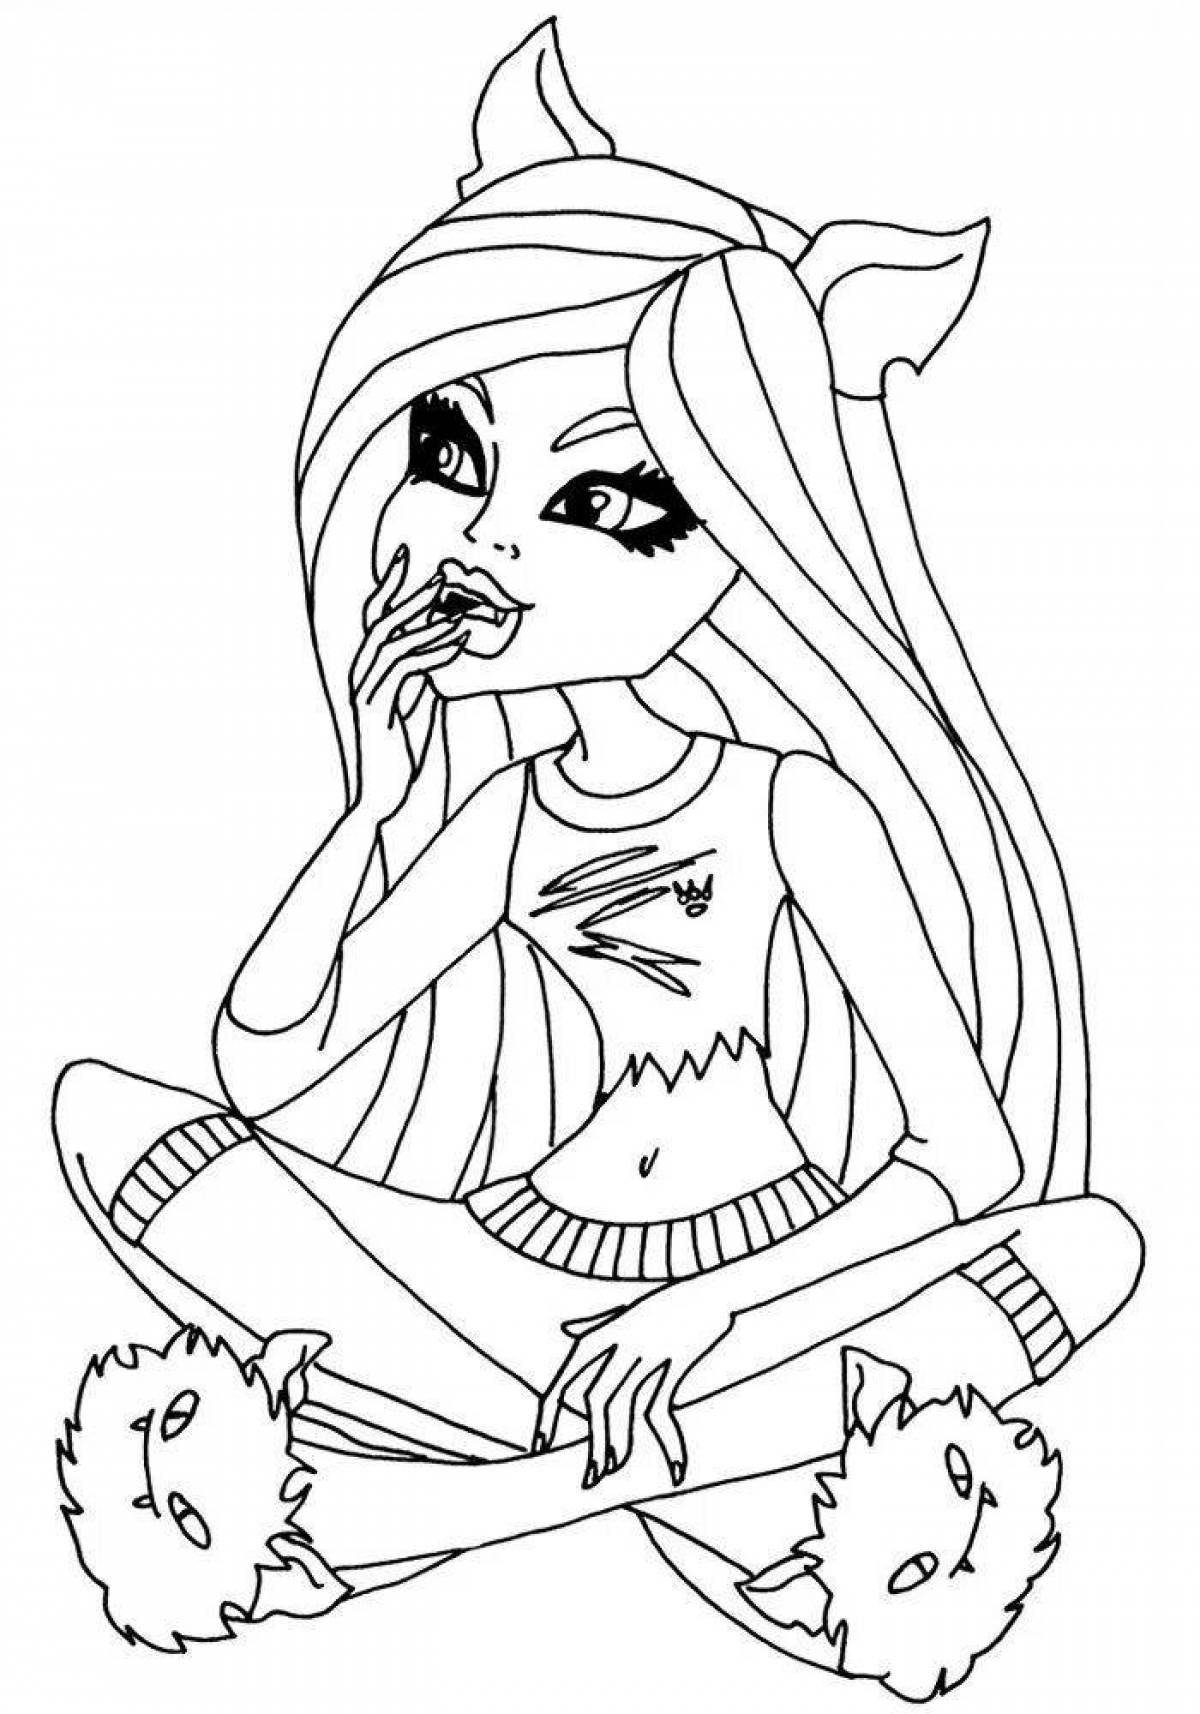 Happy monster coloring page